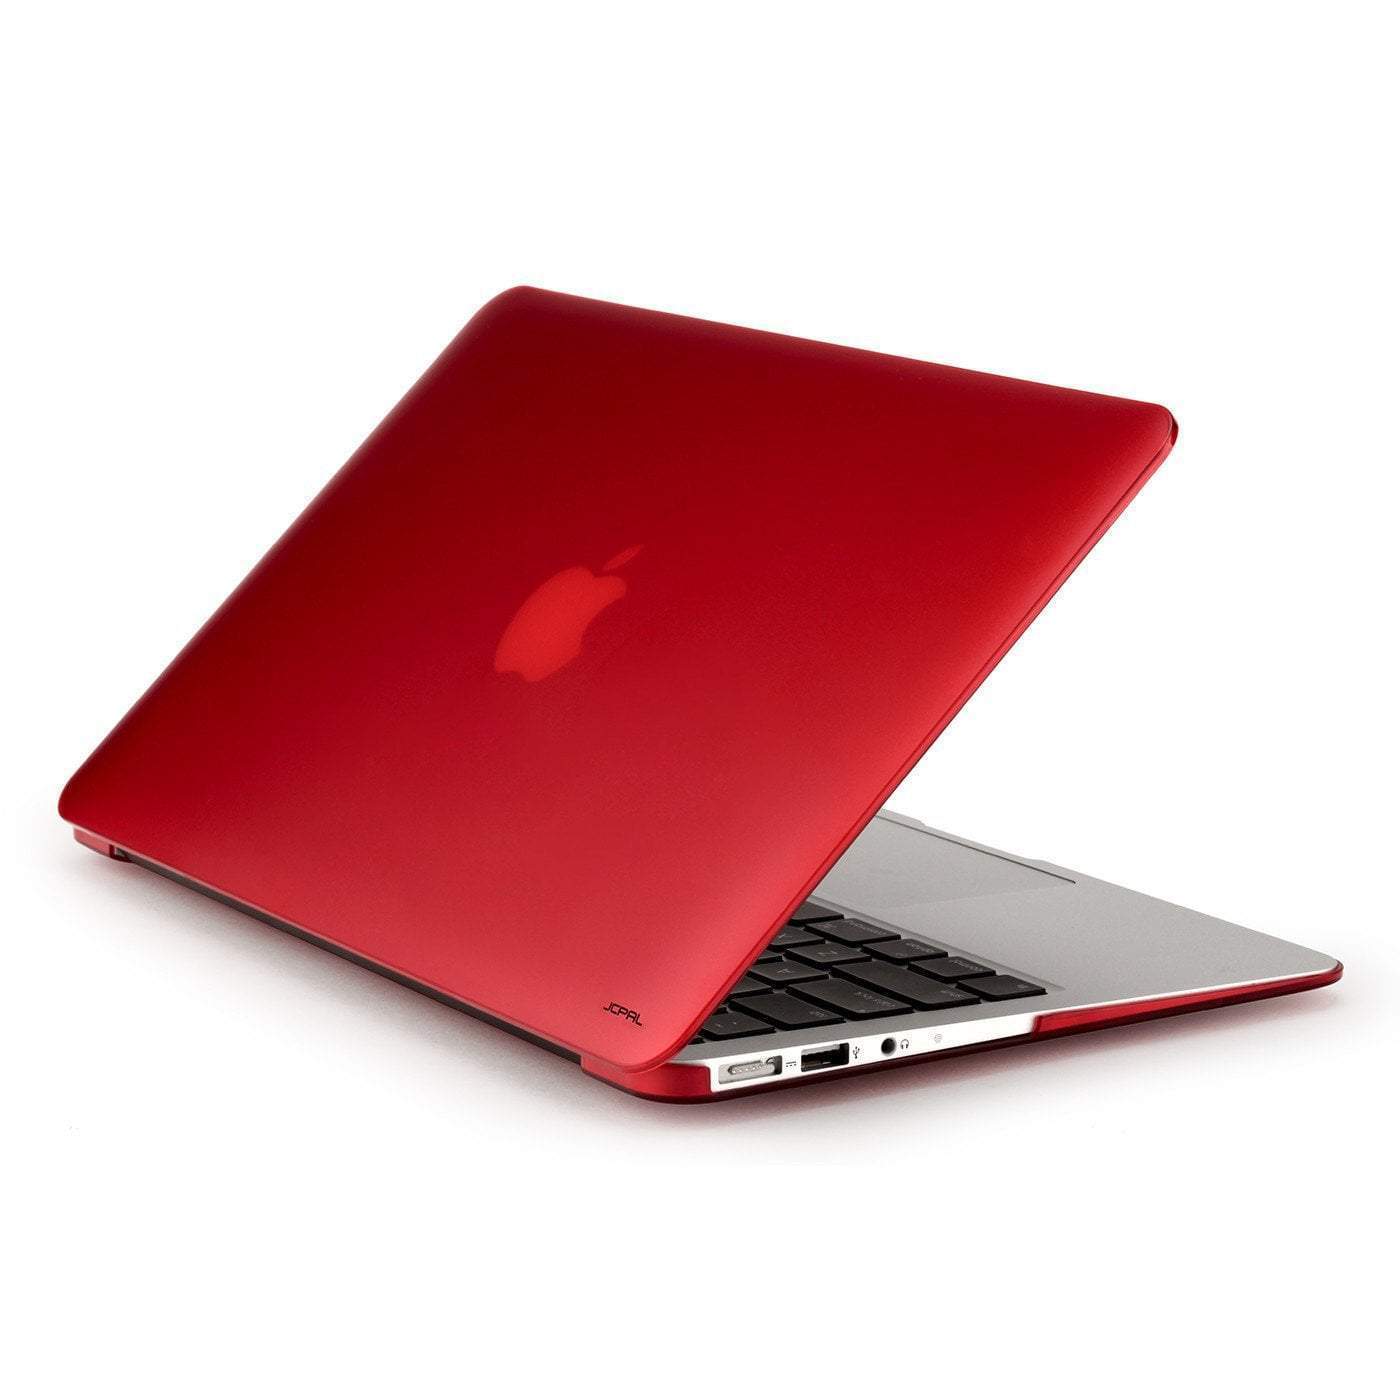 JCPal Case MacGuard Ultra-thin Protective Case for MacBook Air 11" MacBook Air 11" / Cherry Red